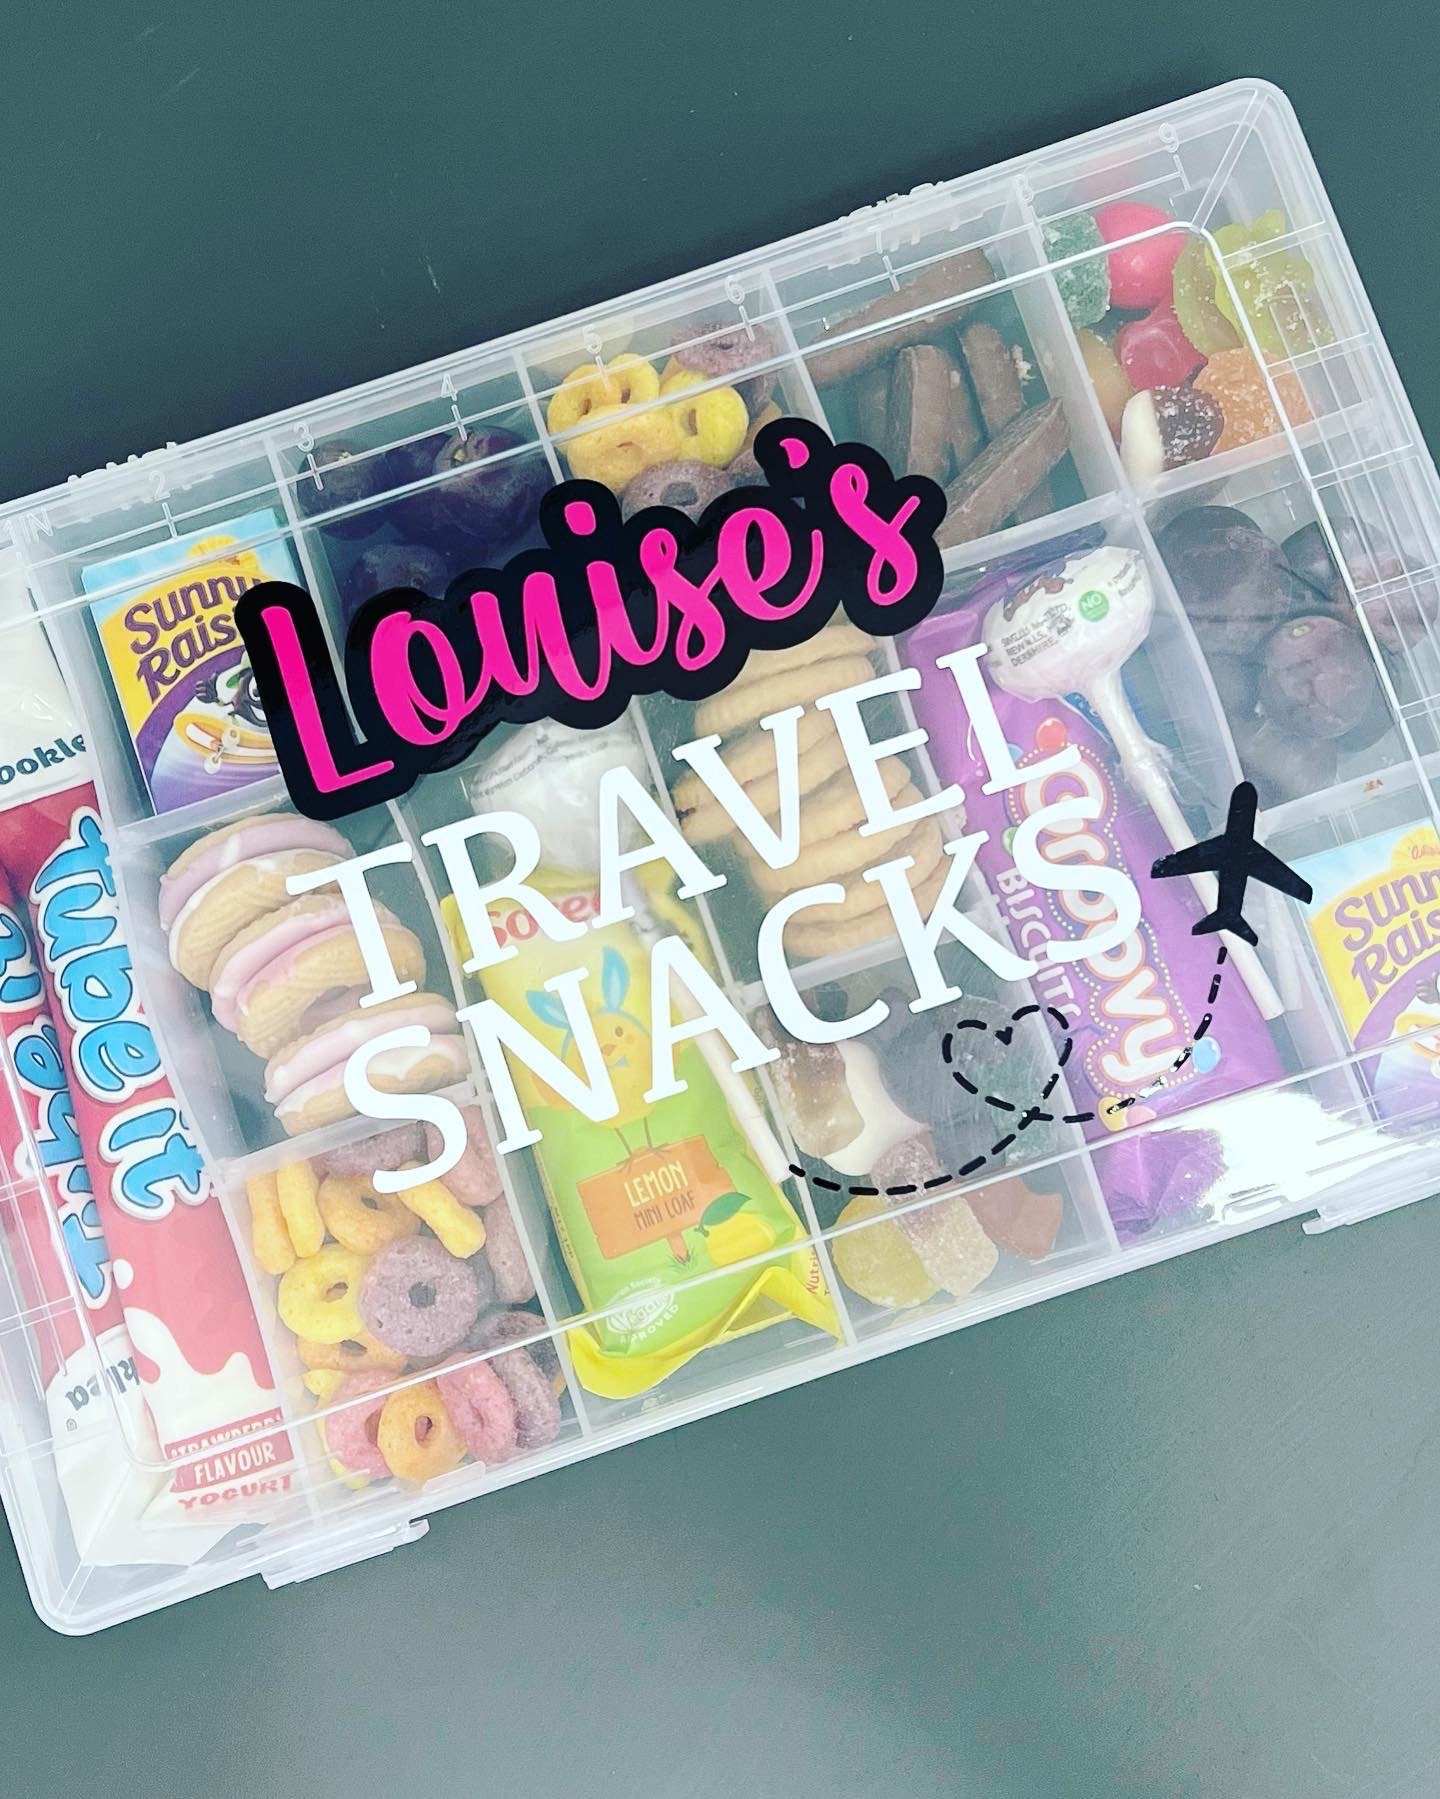 Personalised Travel Snacks Box Plane Snacks Road Trip Snacks Child Snack Box  With Compartments Long Journey Child Holiday Gift 